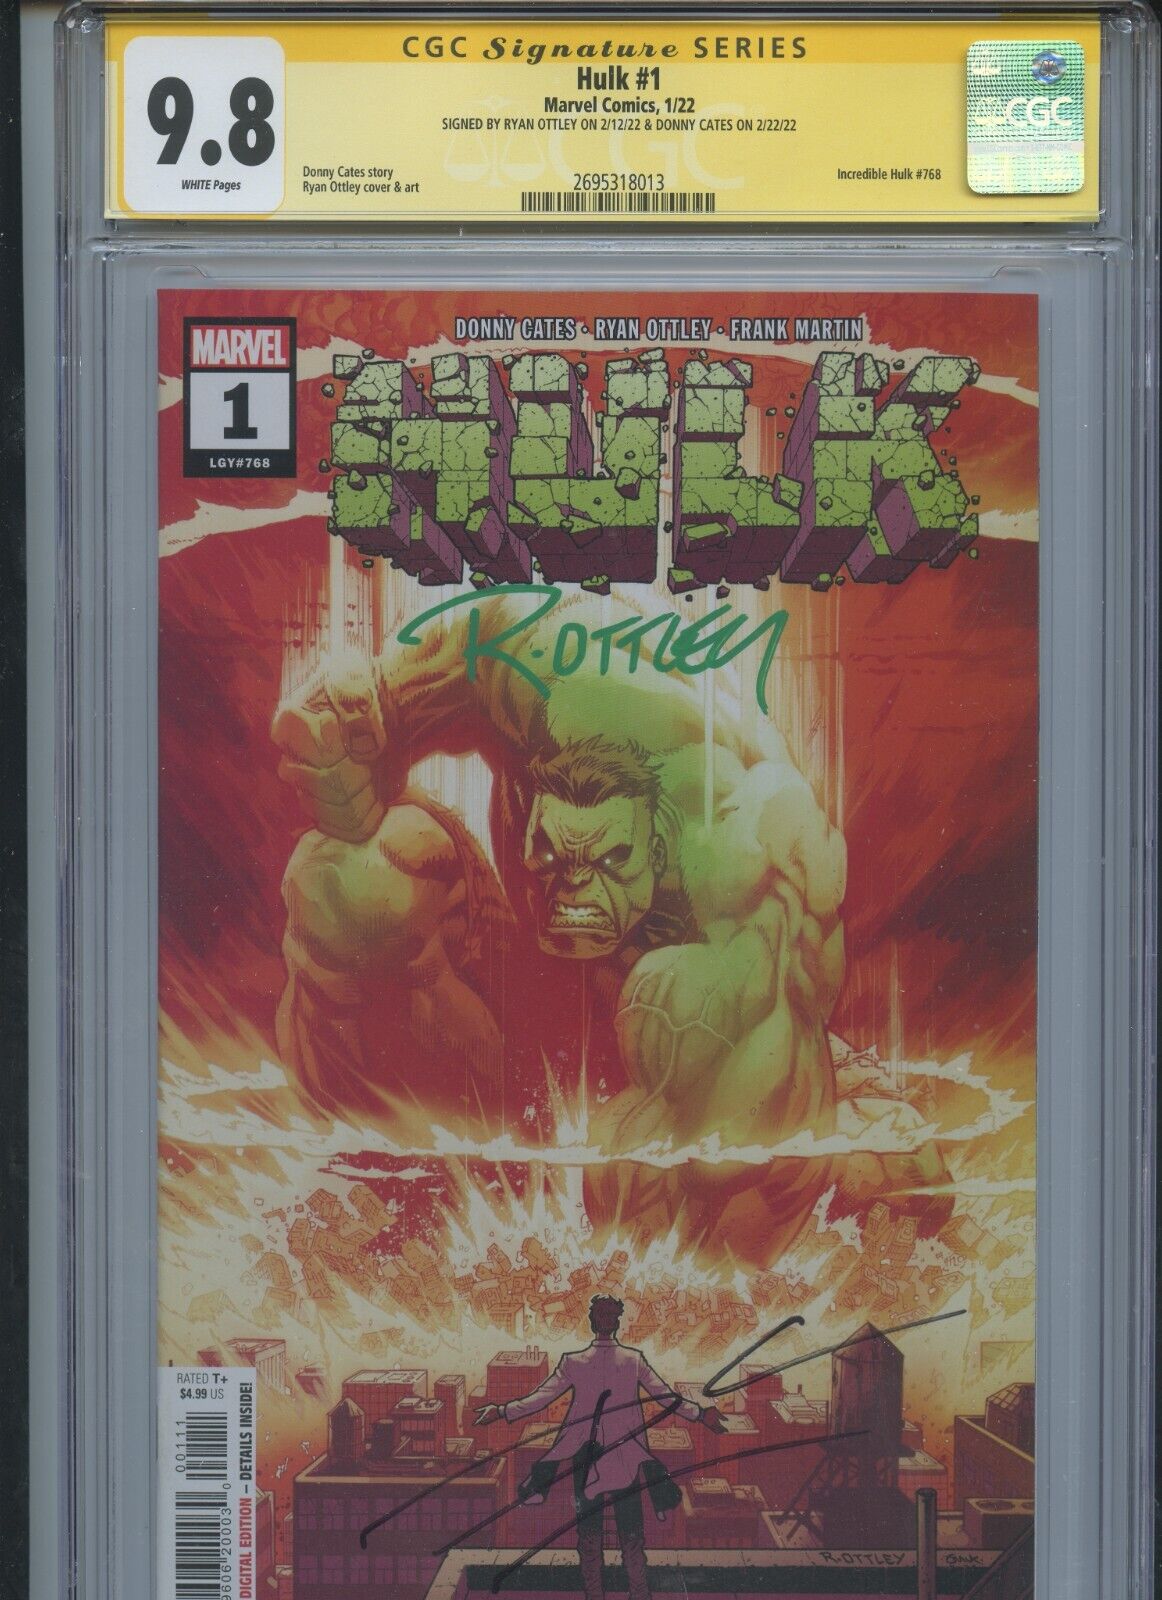 Hulk #1 2022 CGC Signature Series Signed By Ryan Ottley/Donny Cates